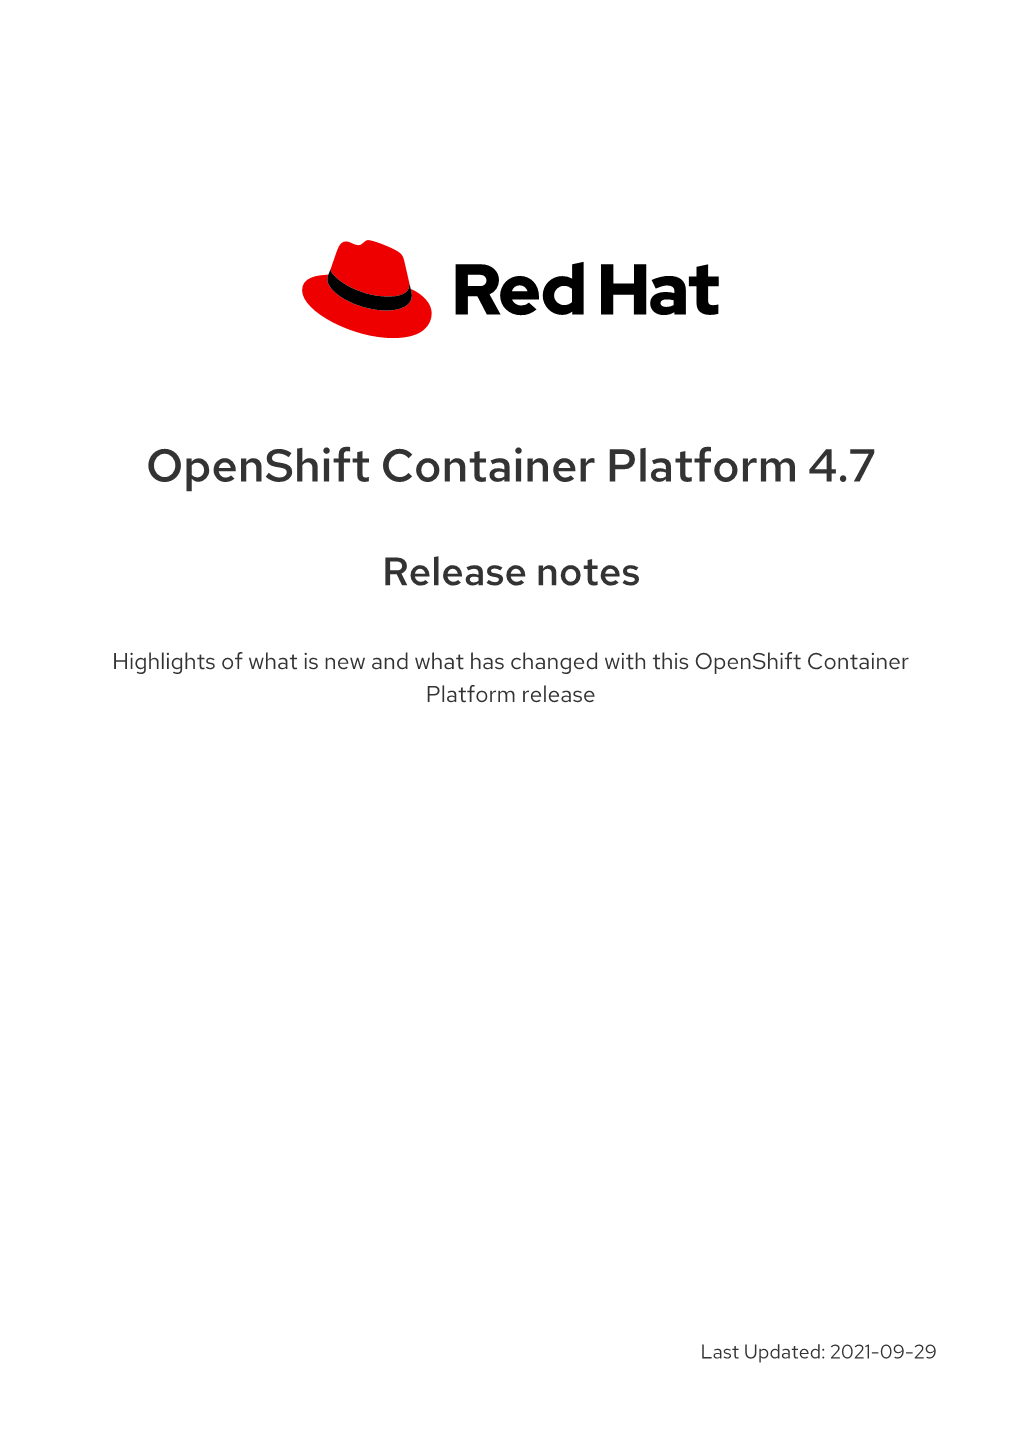 Openshift Container Platform 4.7 Release Notes